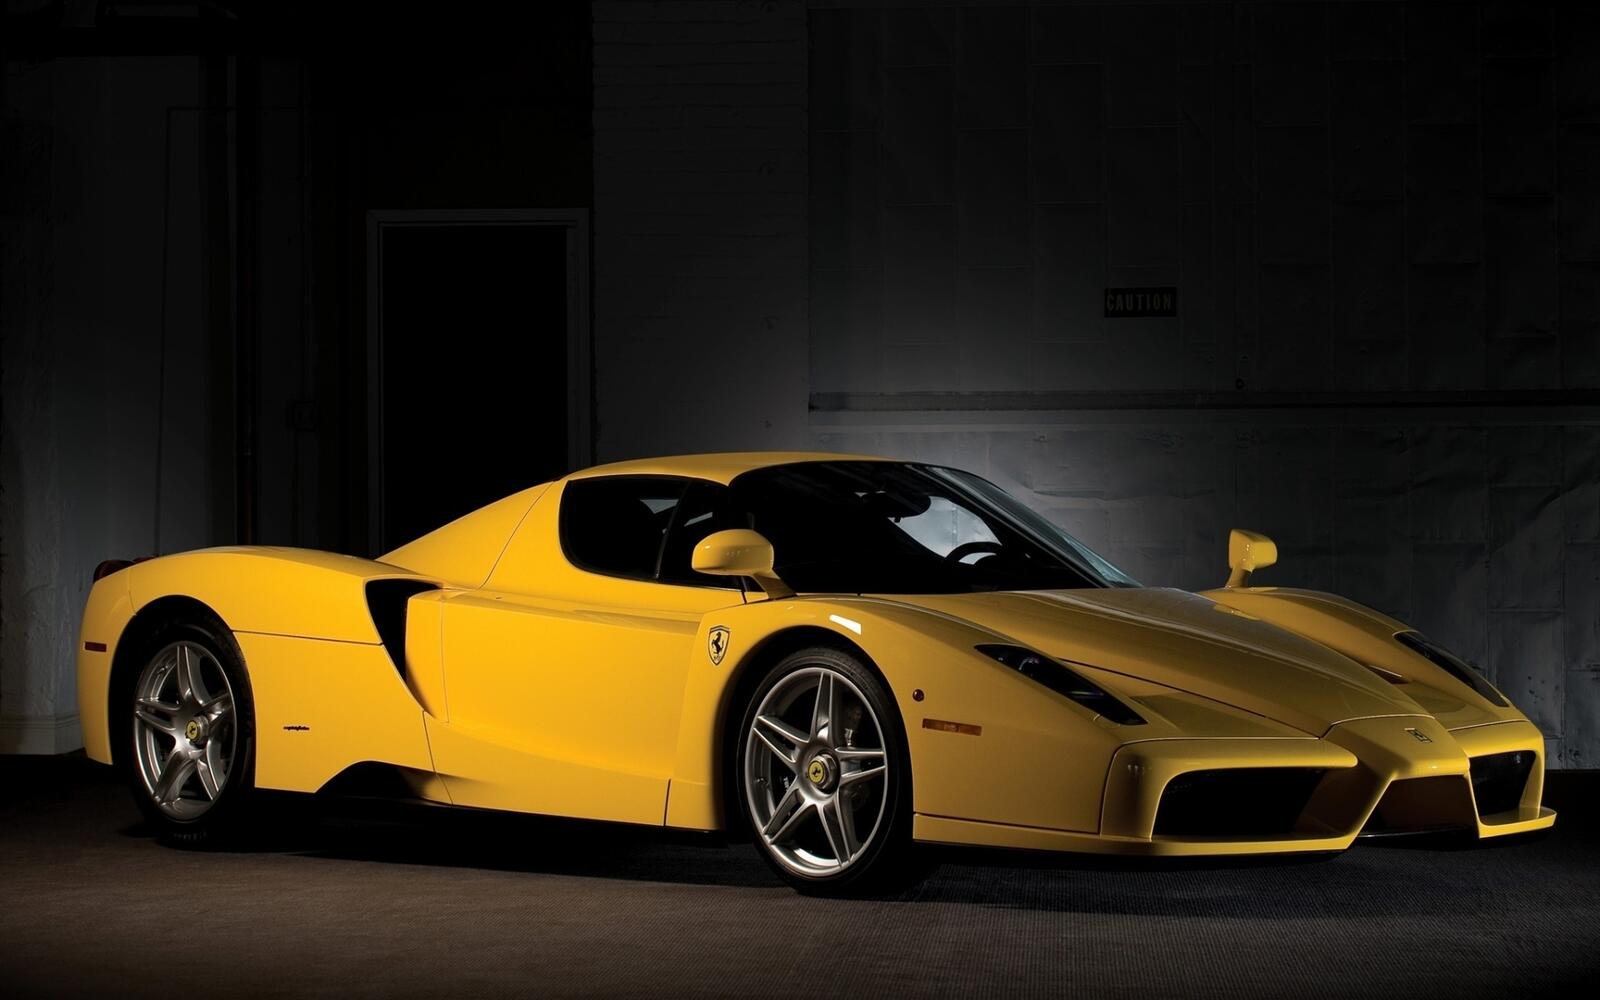 Wallpapers car sports yellow on the desktop